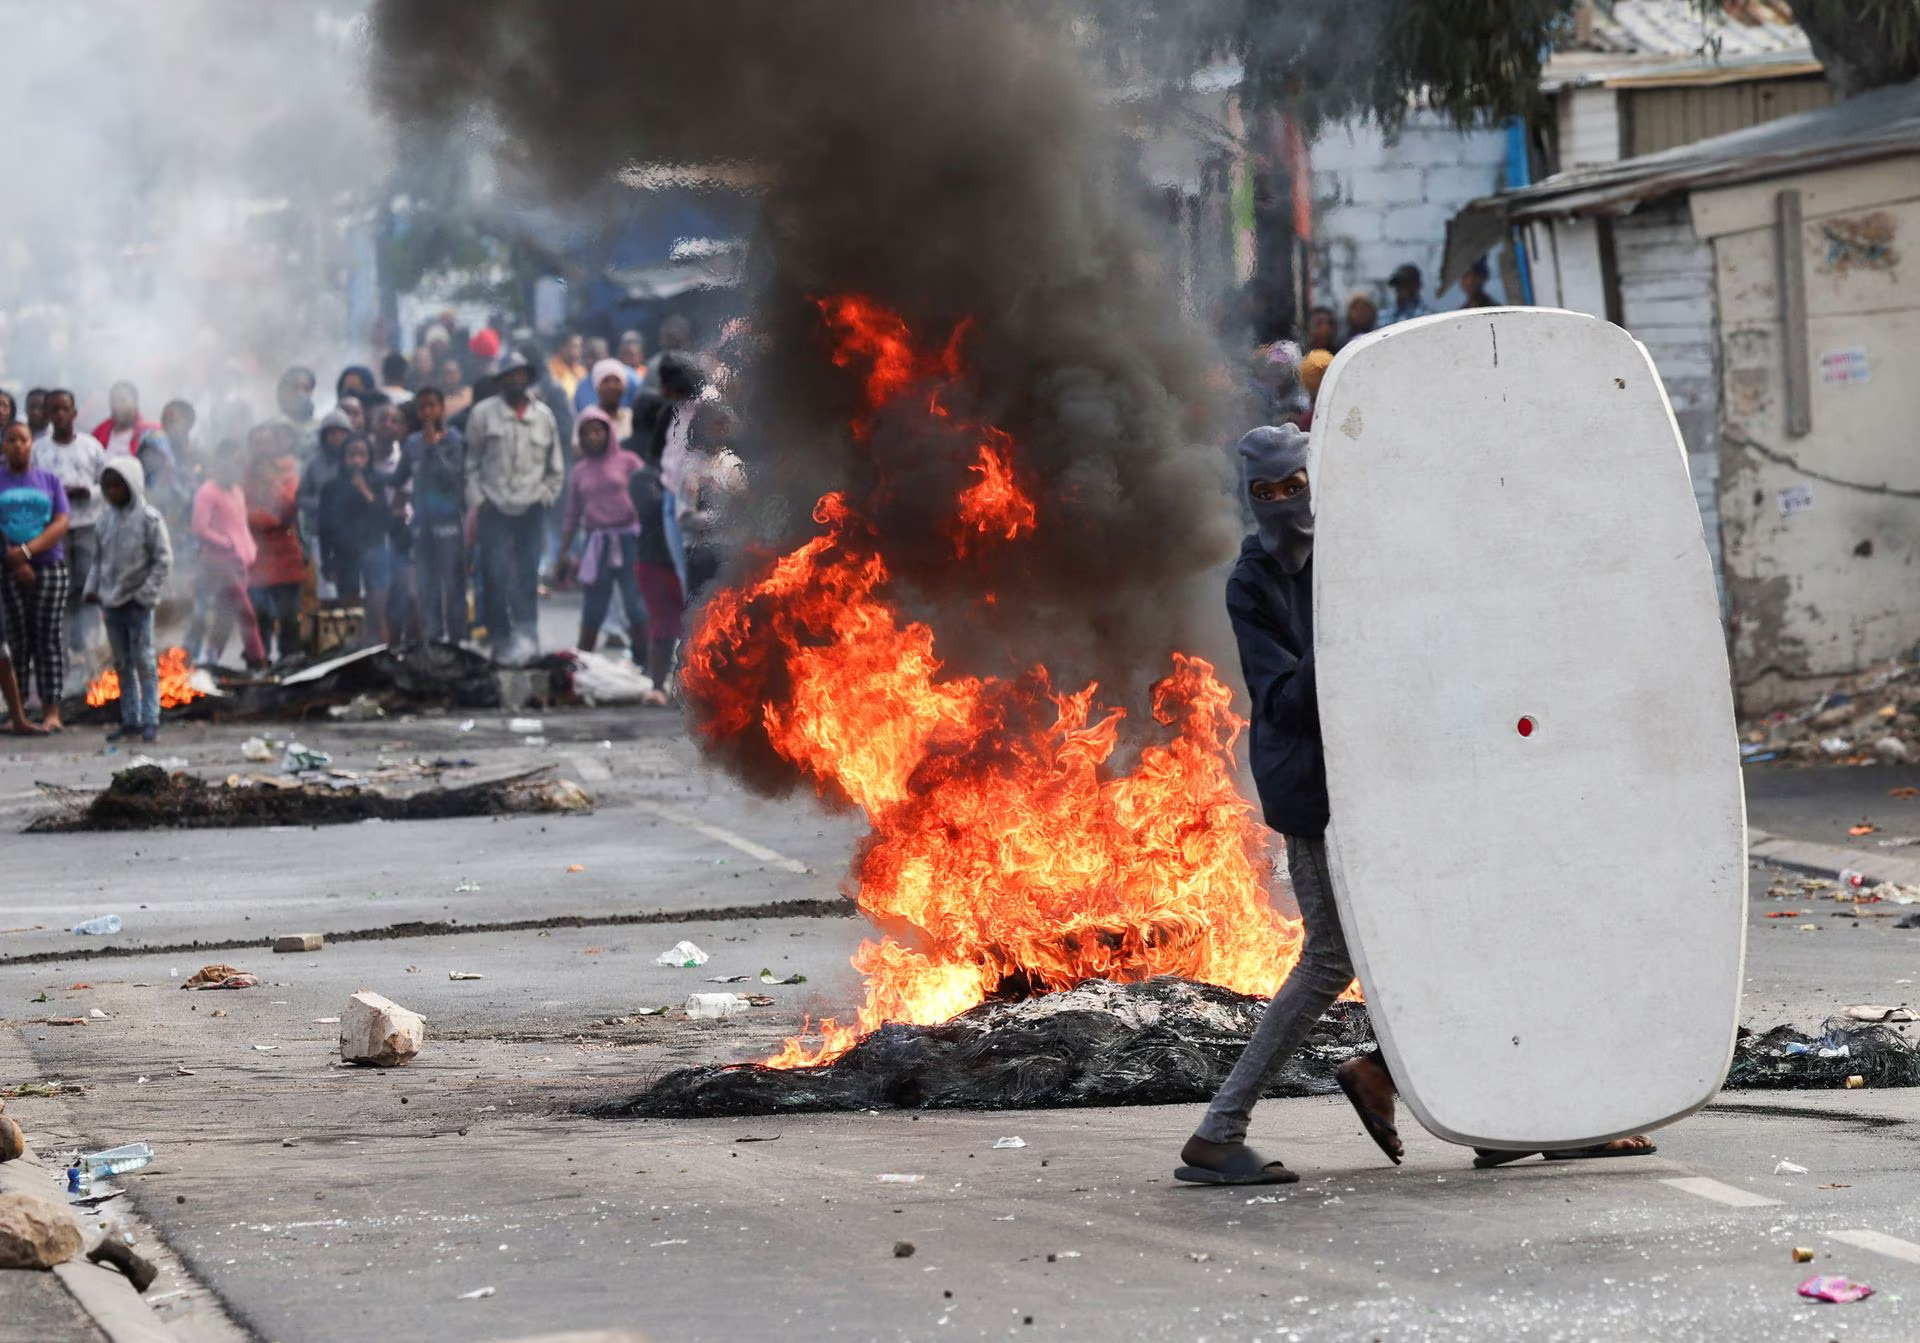 Cape Town taxi strike takes fatal turn: five lives lost amidst escalating violence 